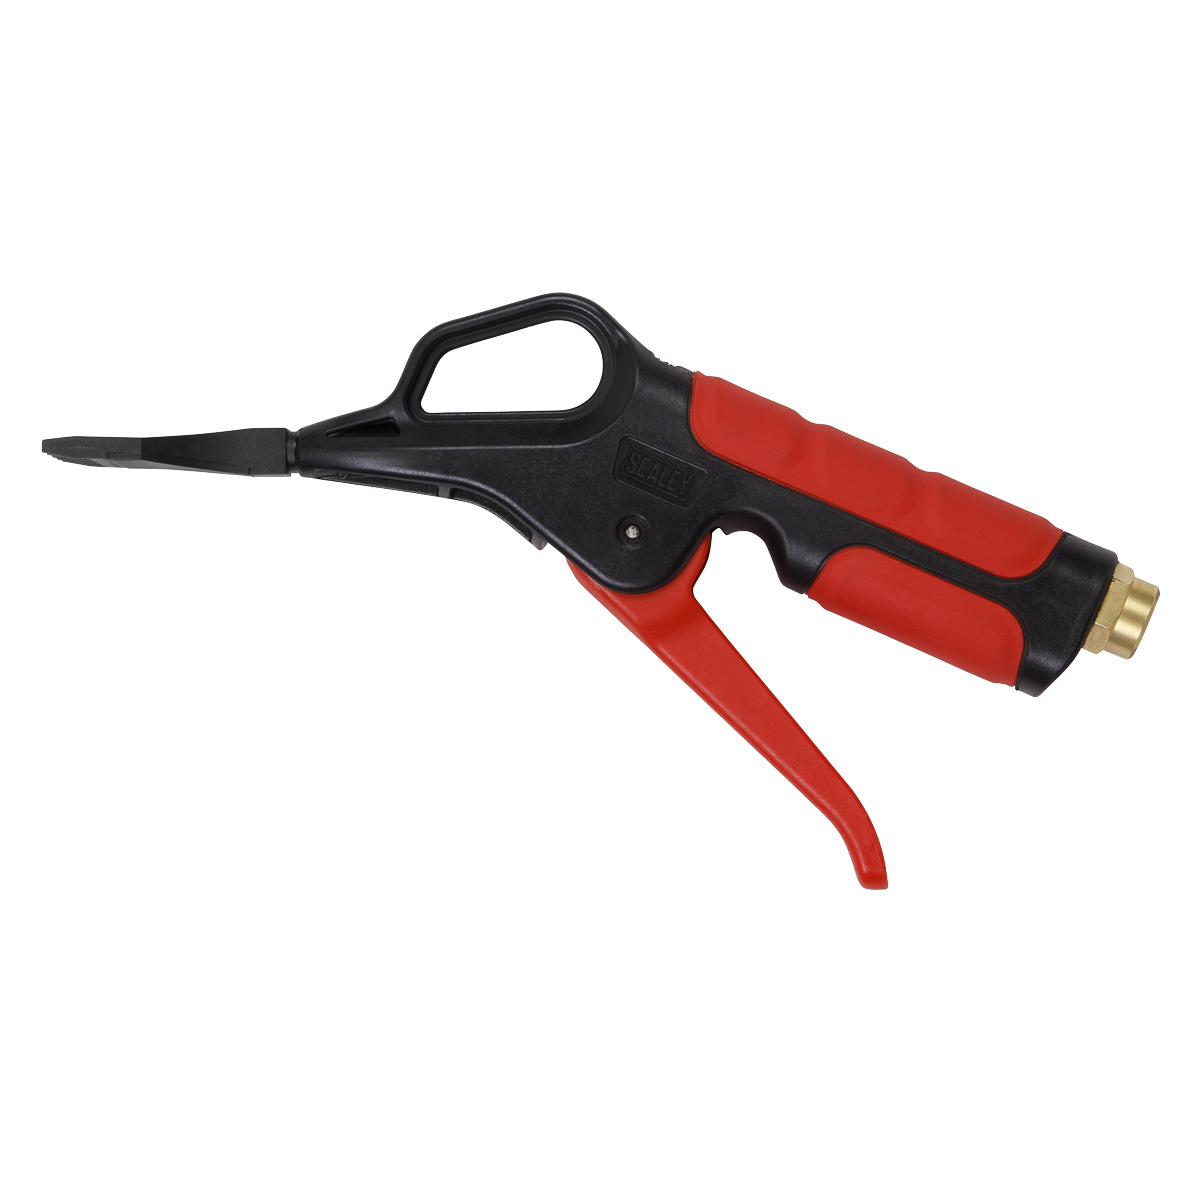 Sealey trigger operated blow gun with air curtain nozzle